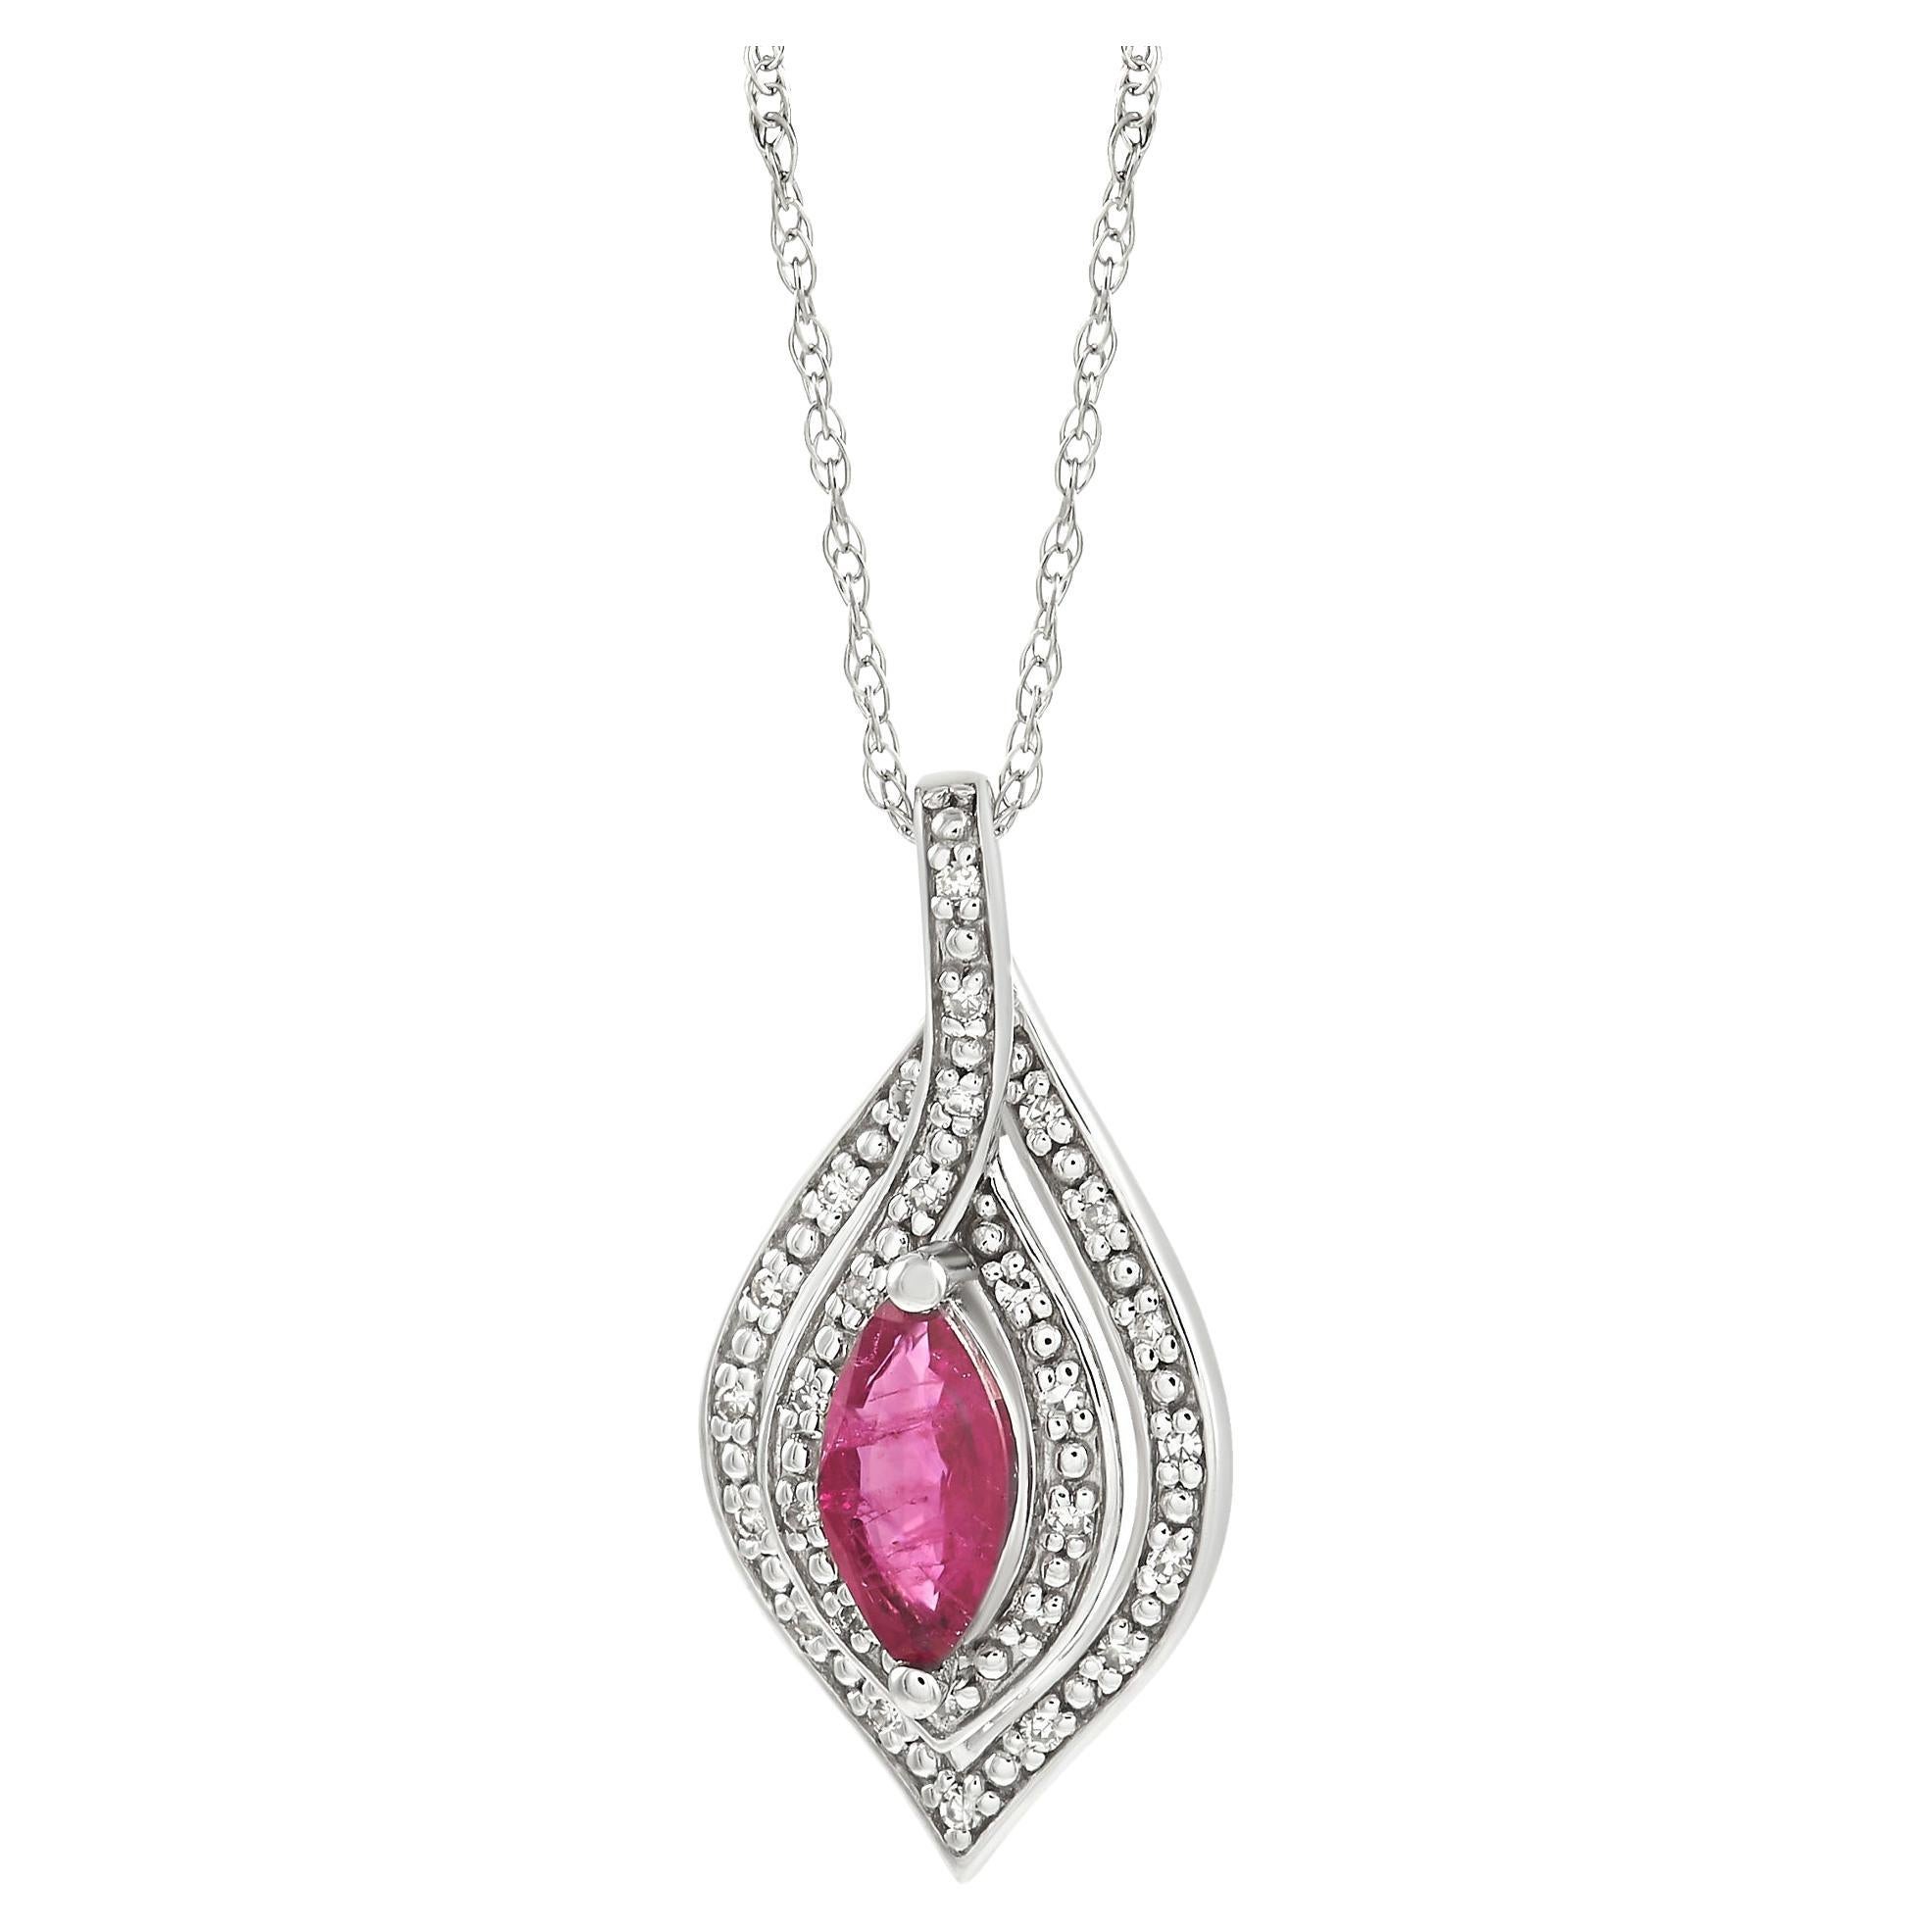 LB Exclusive 14K White Gold 0.08 Ct Diamond and Ruby Necklace